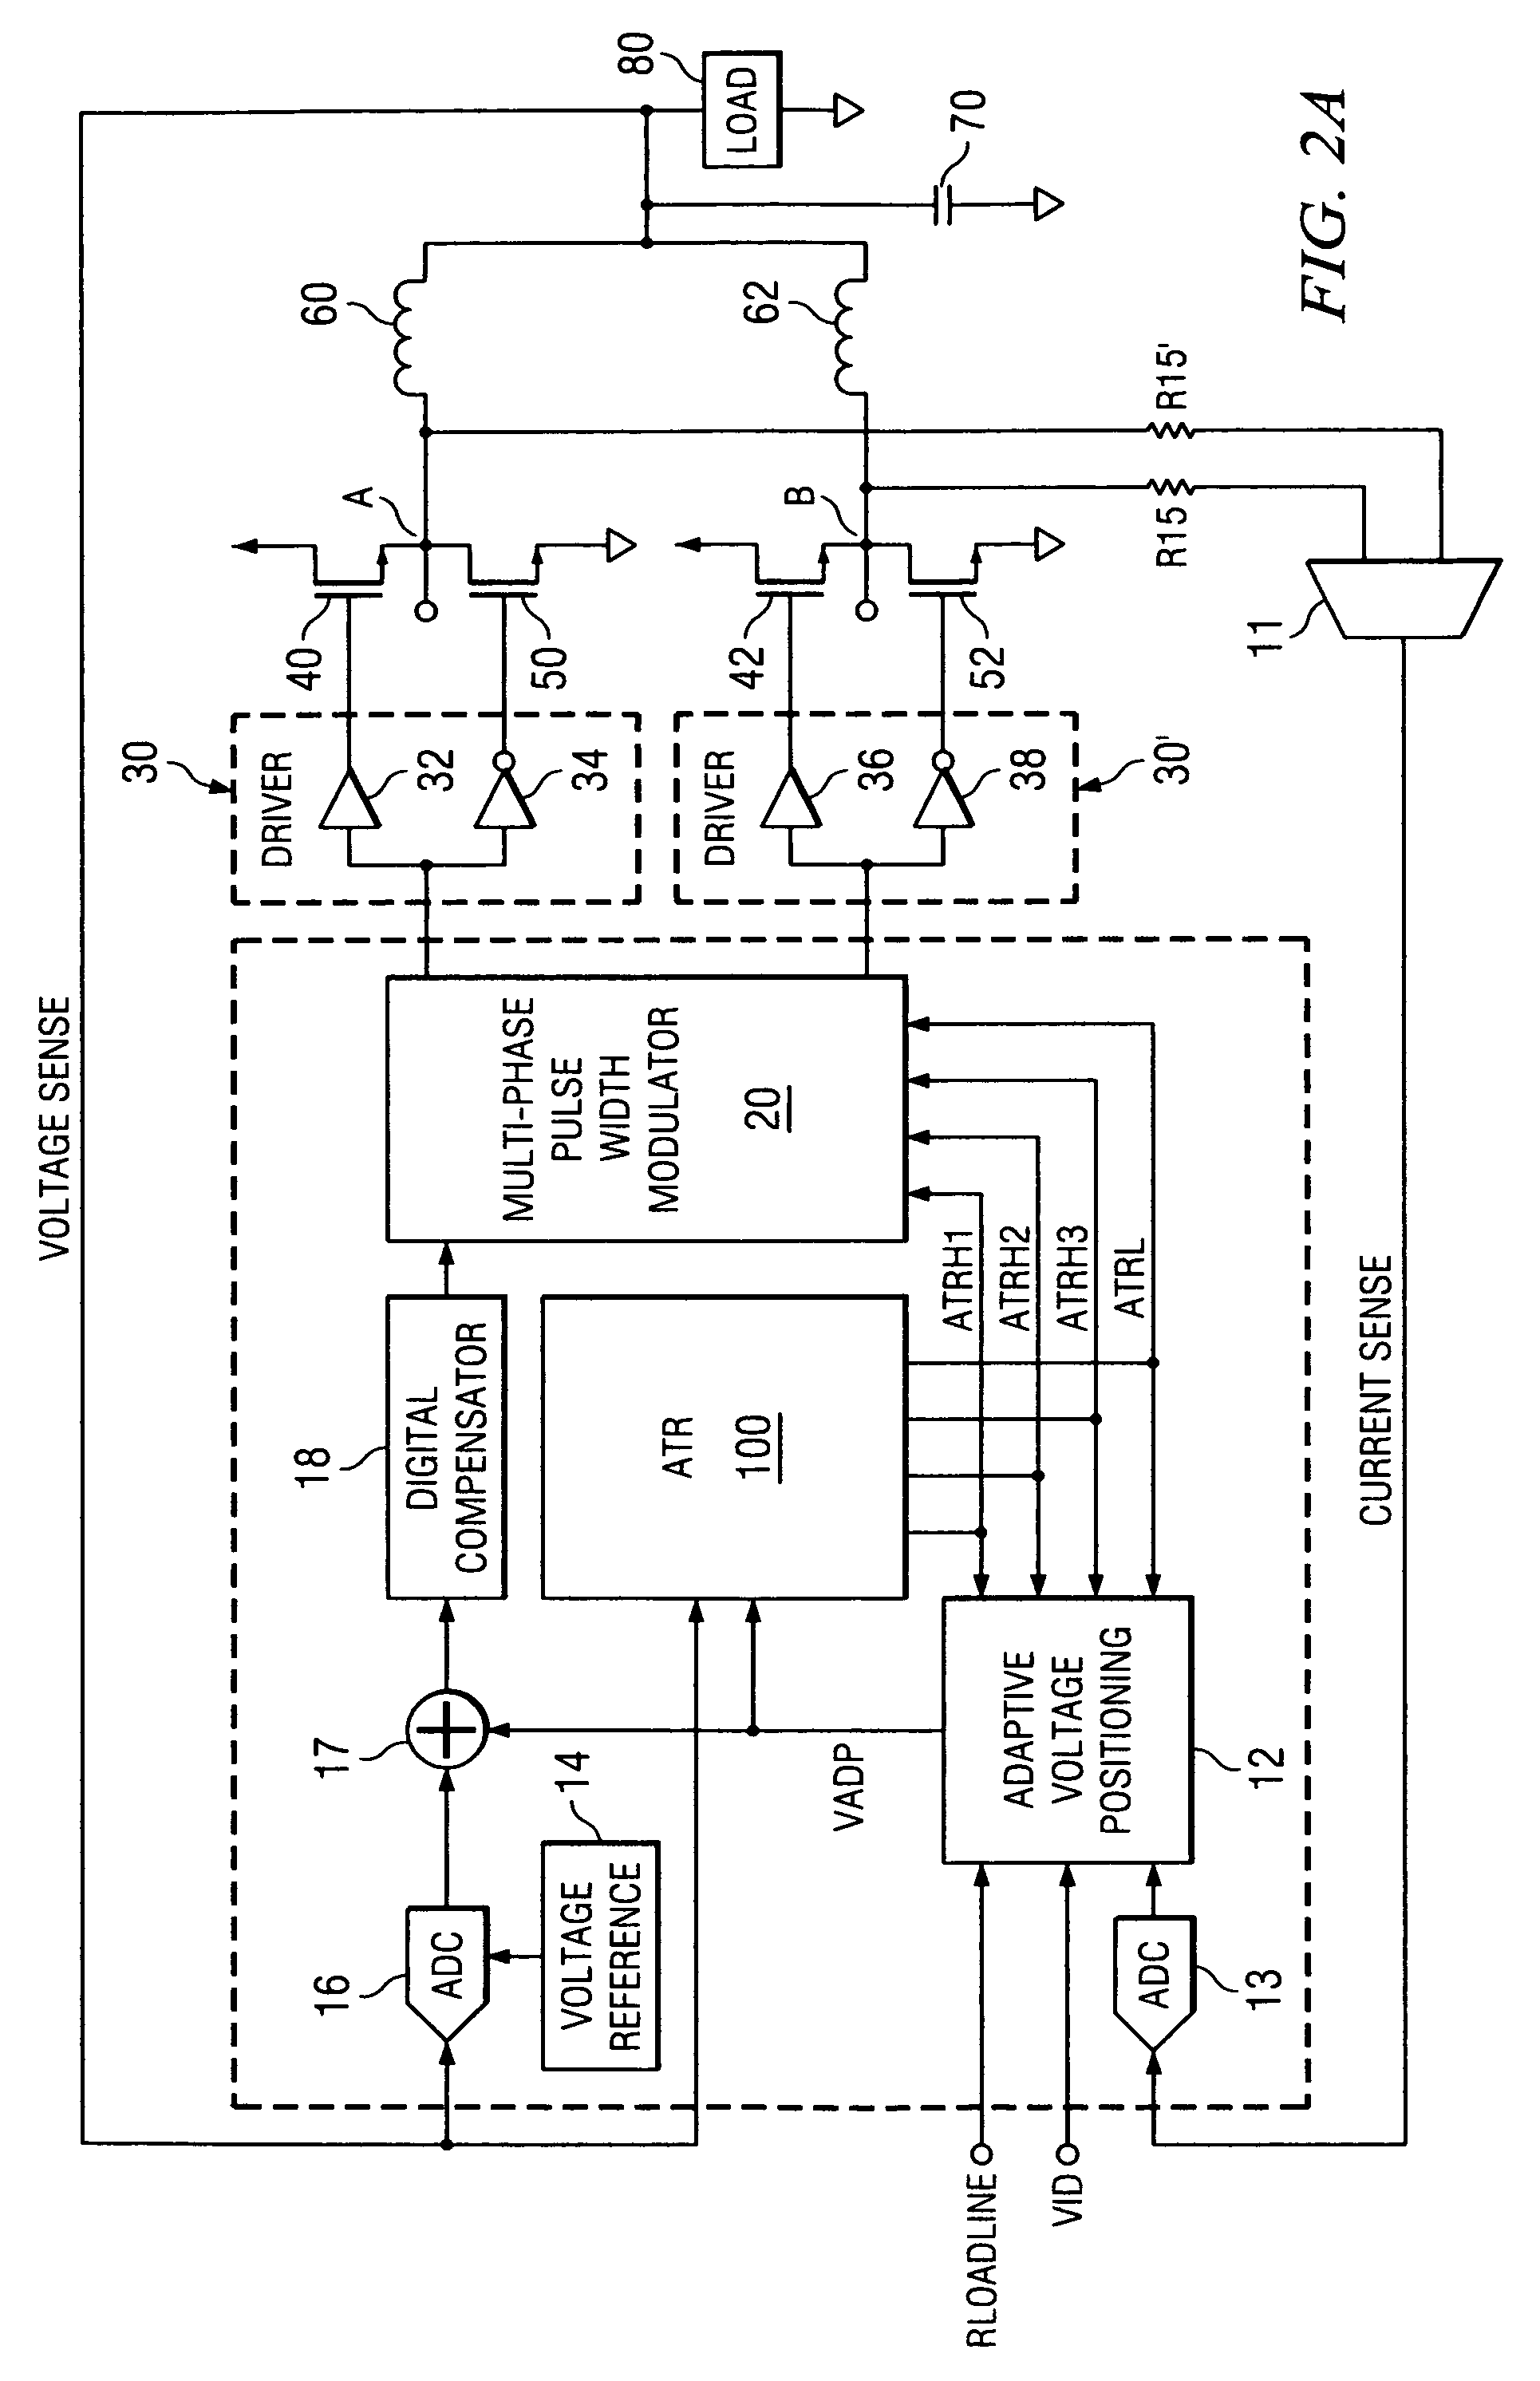 Active transient response circuits, system and method for digital multiphase pulse width modulated regulators